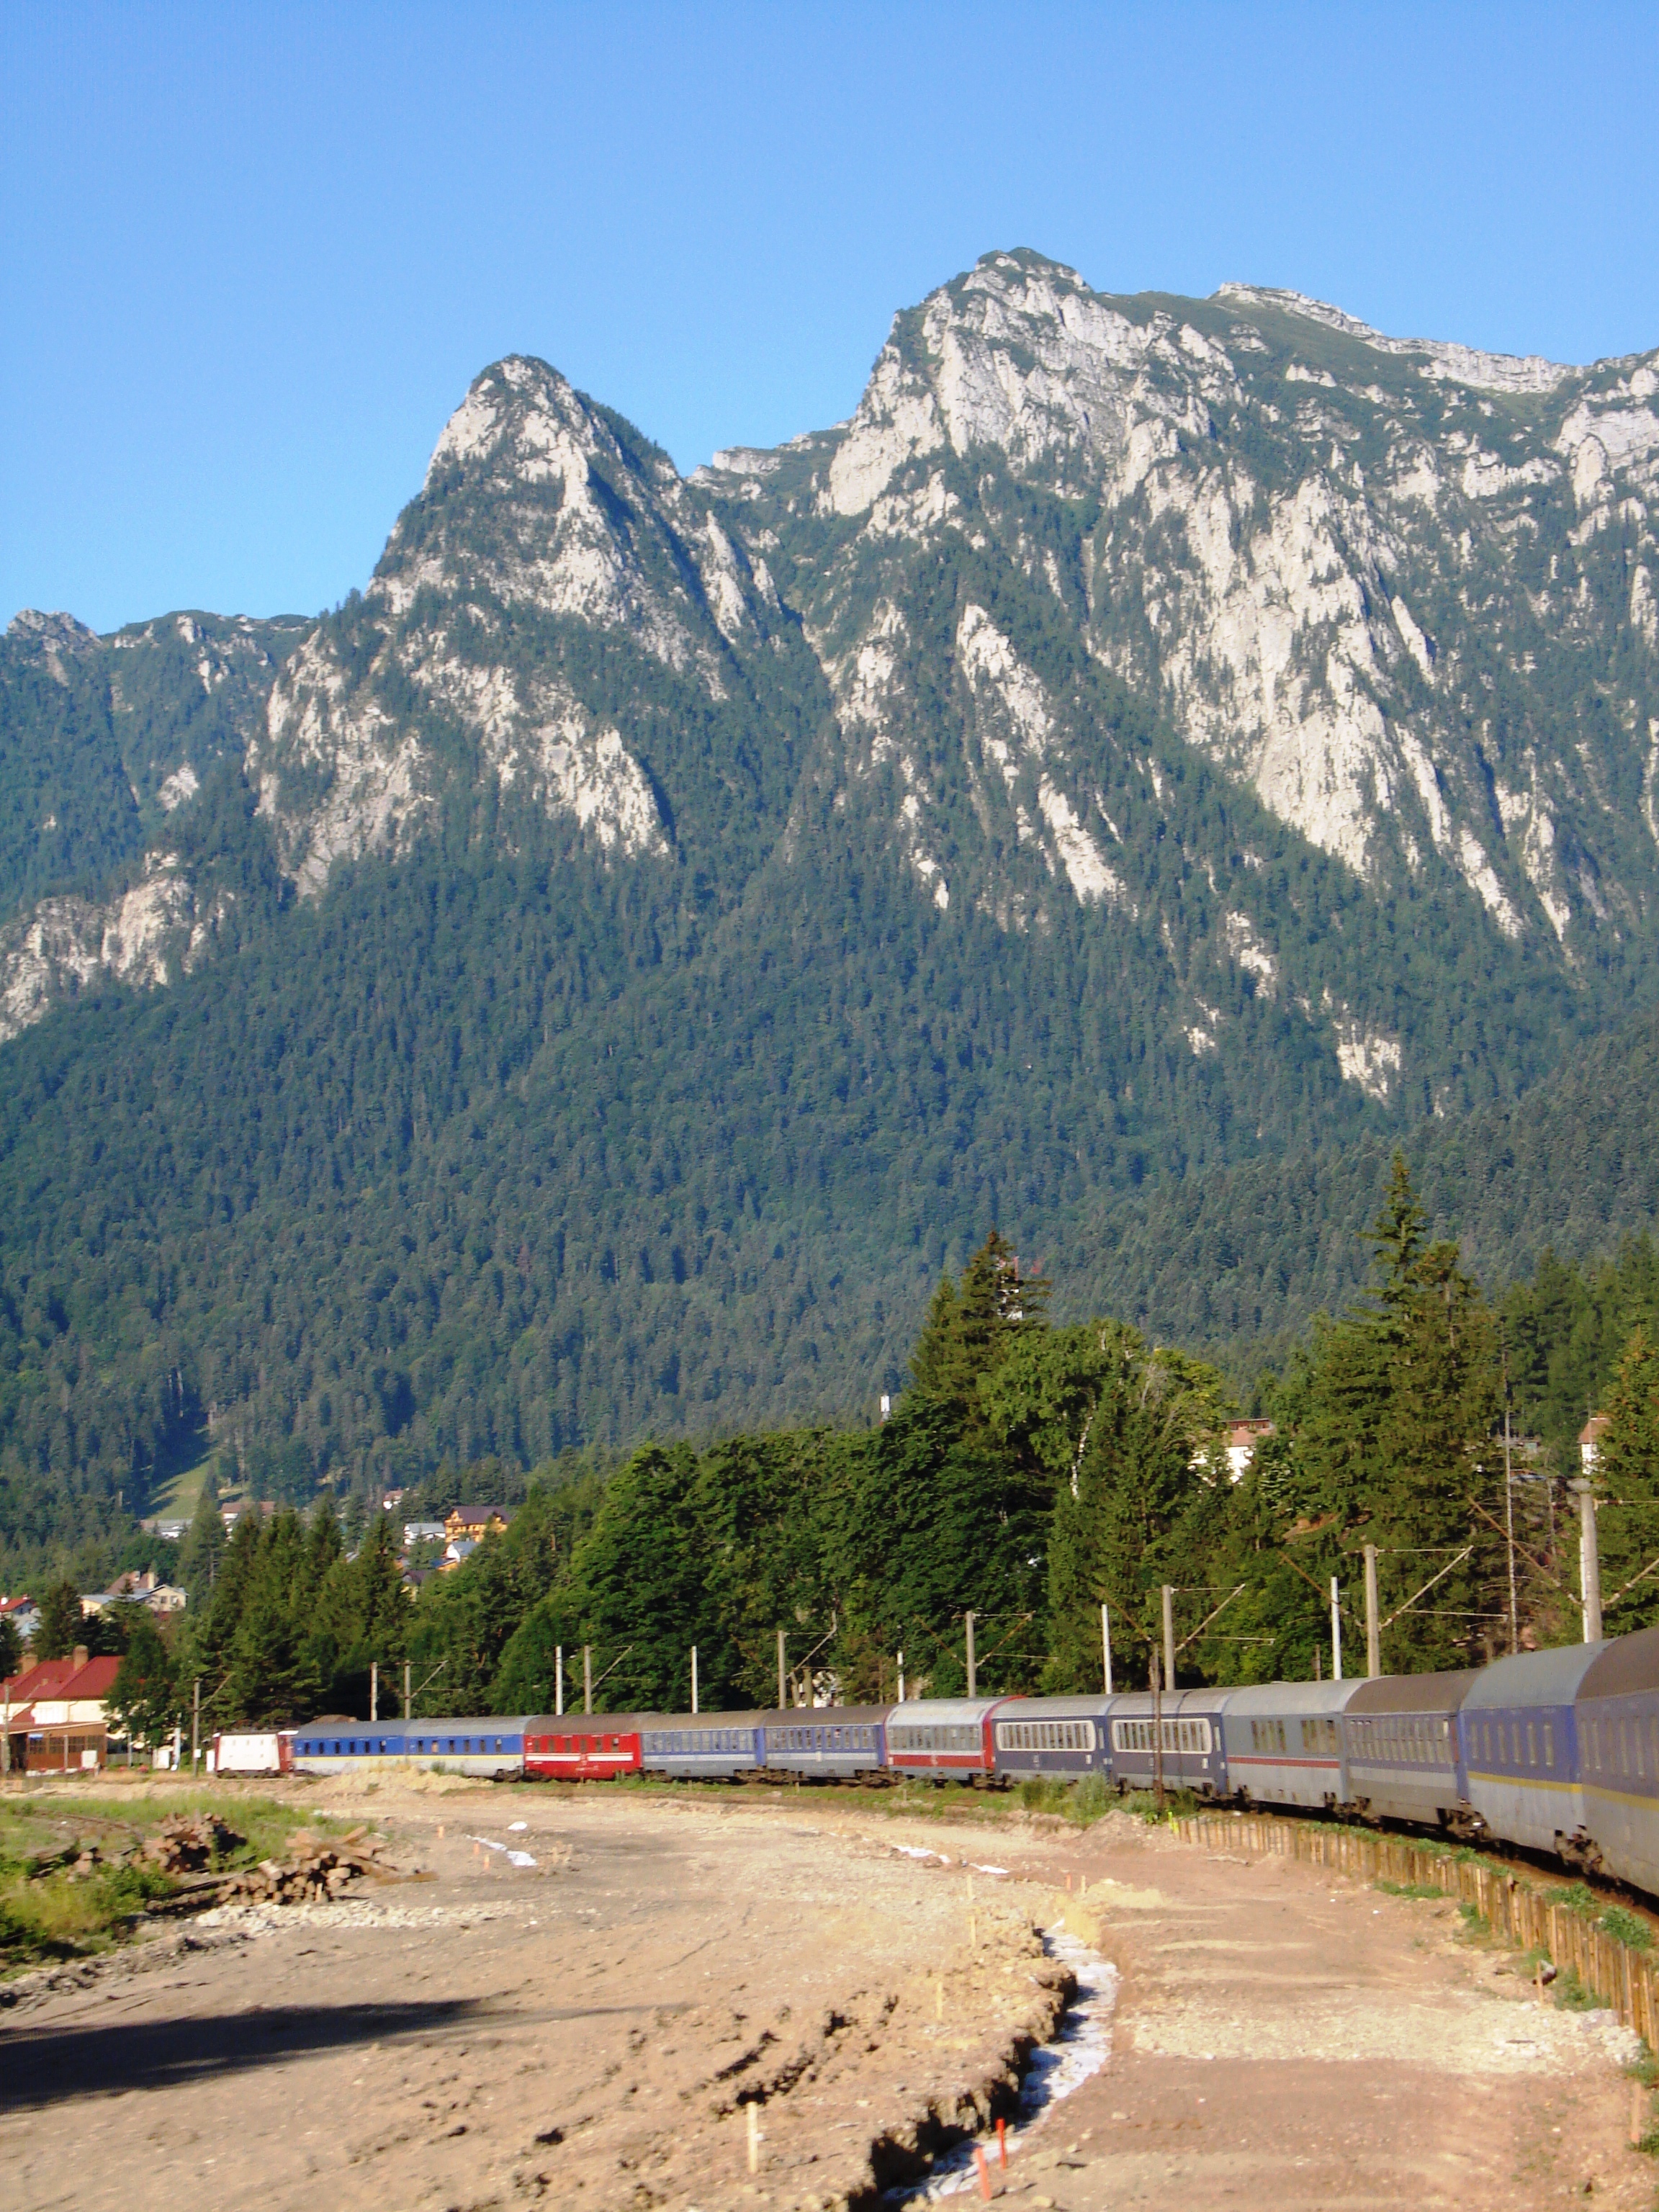 Rail travel is the most scenic way to get across Romania